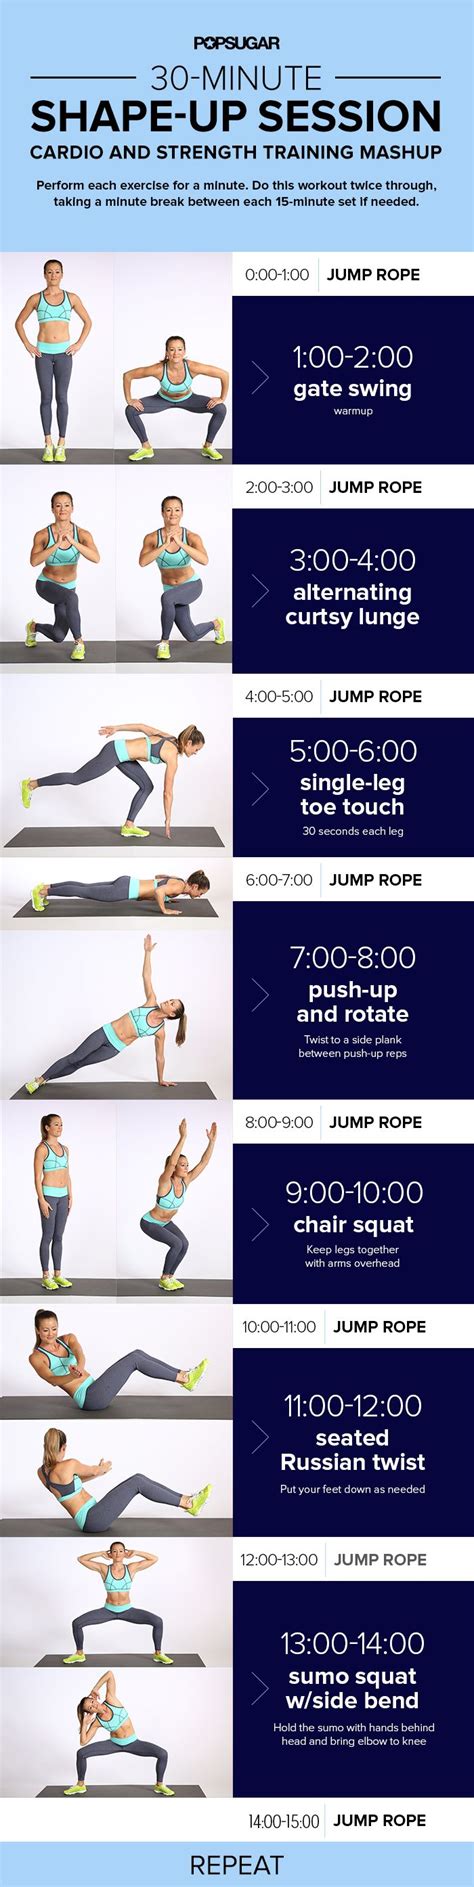 Hourglass Body Workouts That Will Give You An Amazing Fit Body Trimmedandtoned